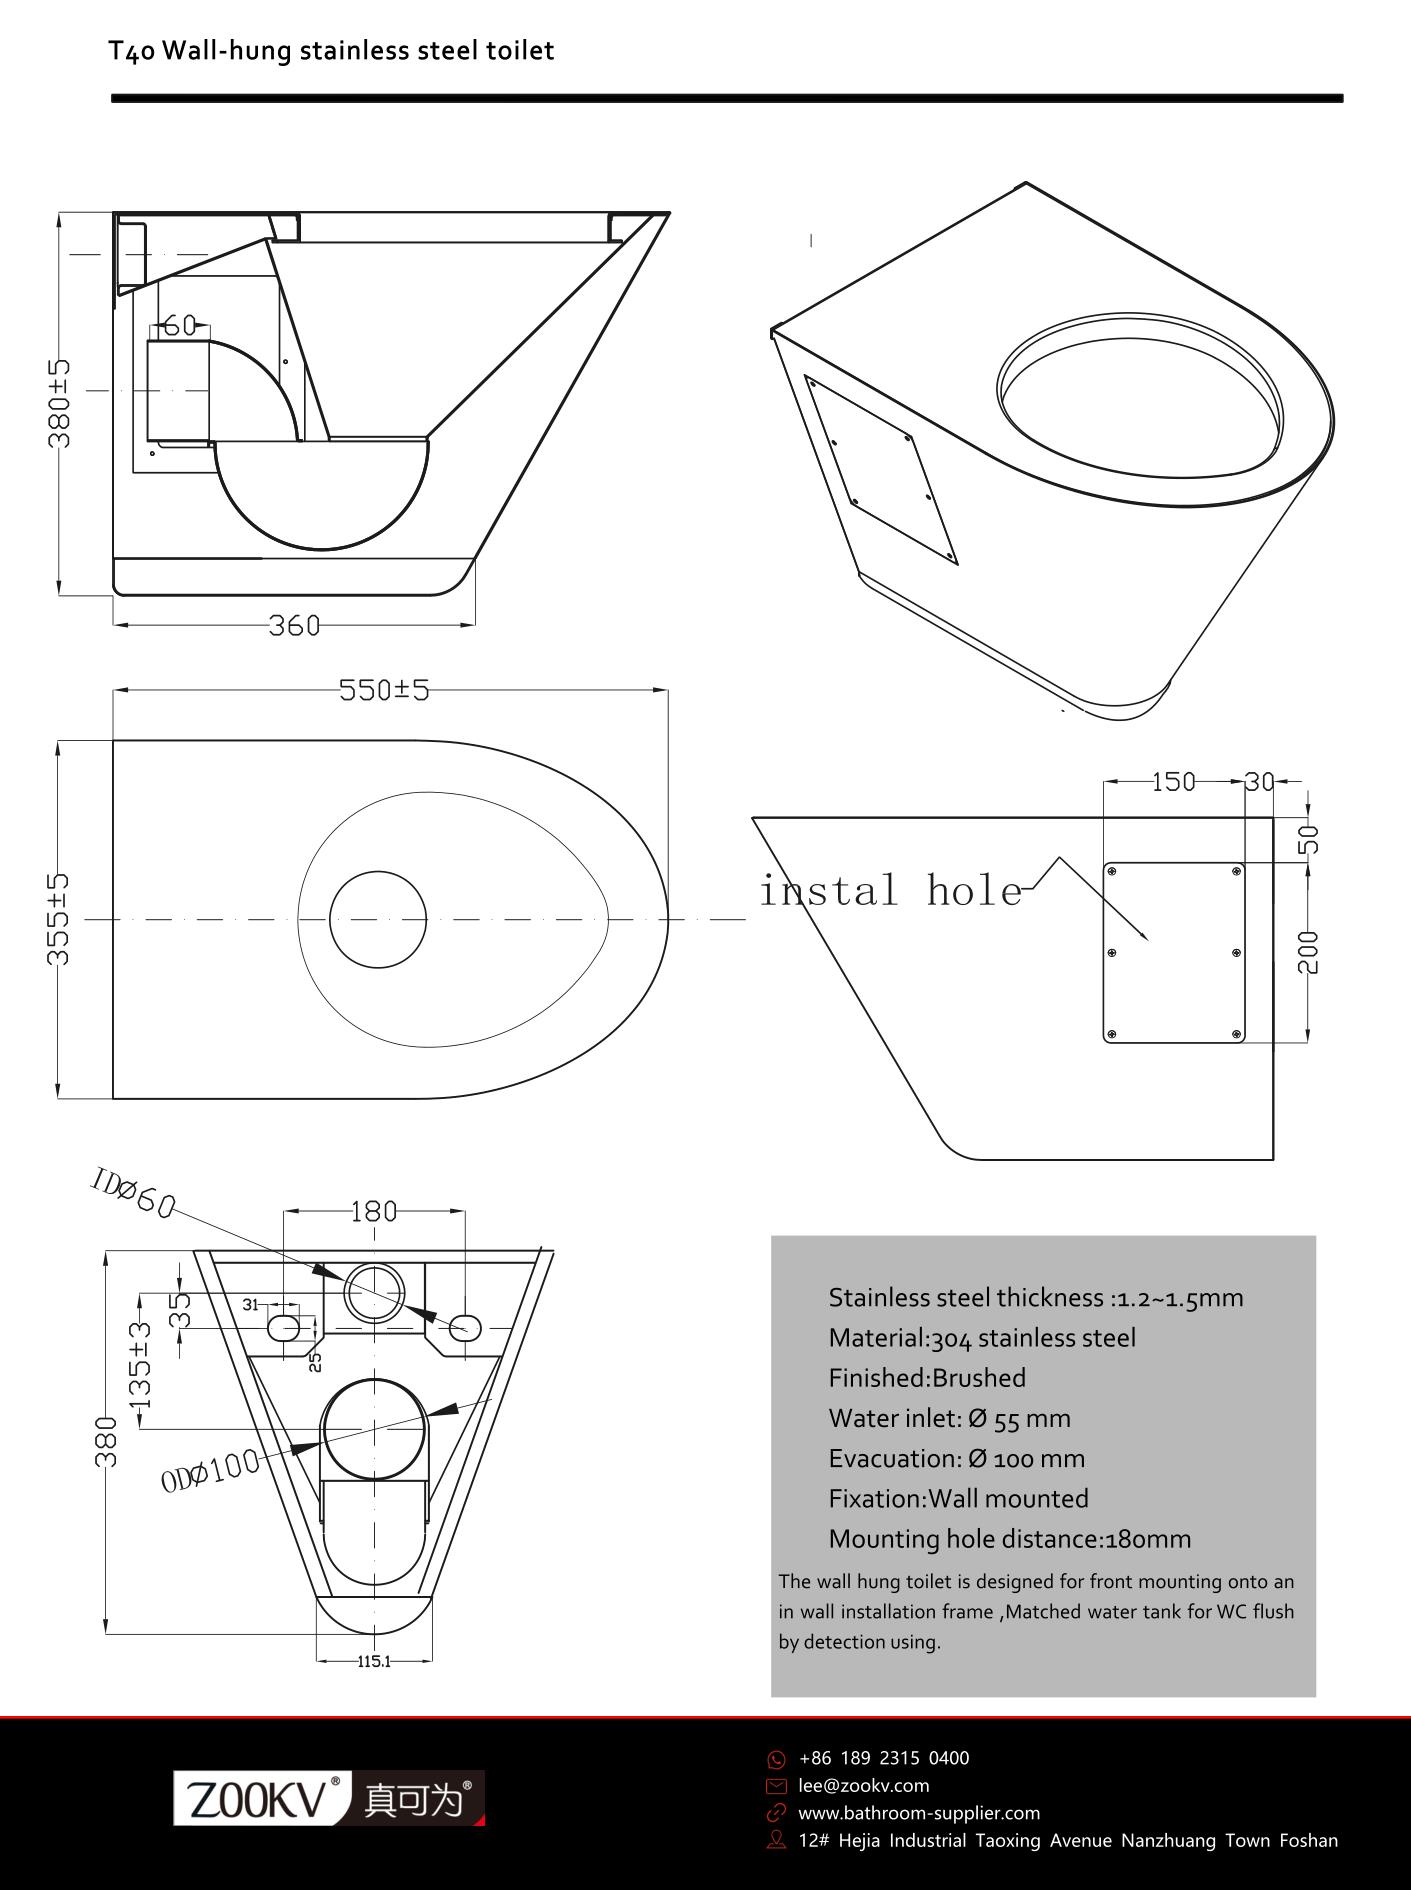 Wall hung stainless steel toilet for PRM ULTIMA.jpg